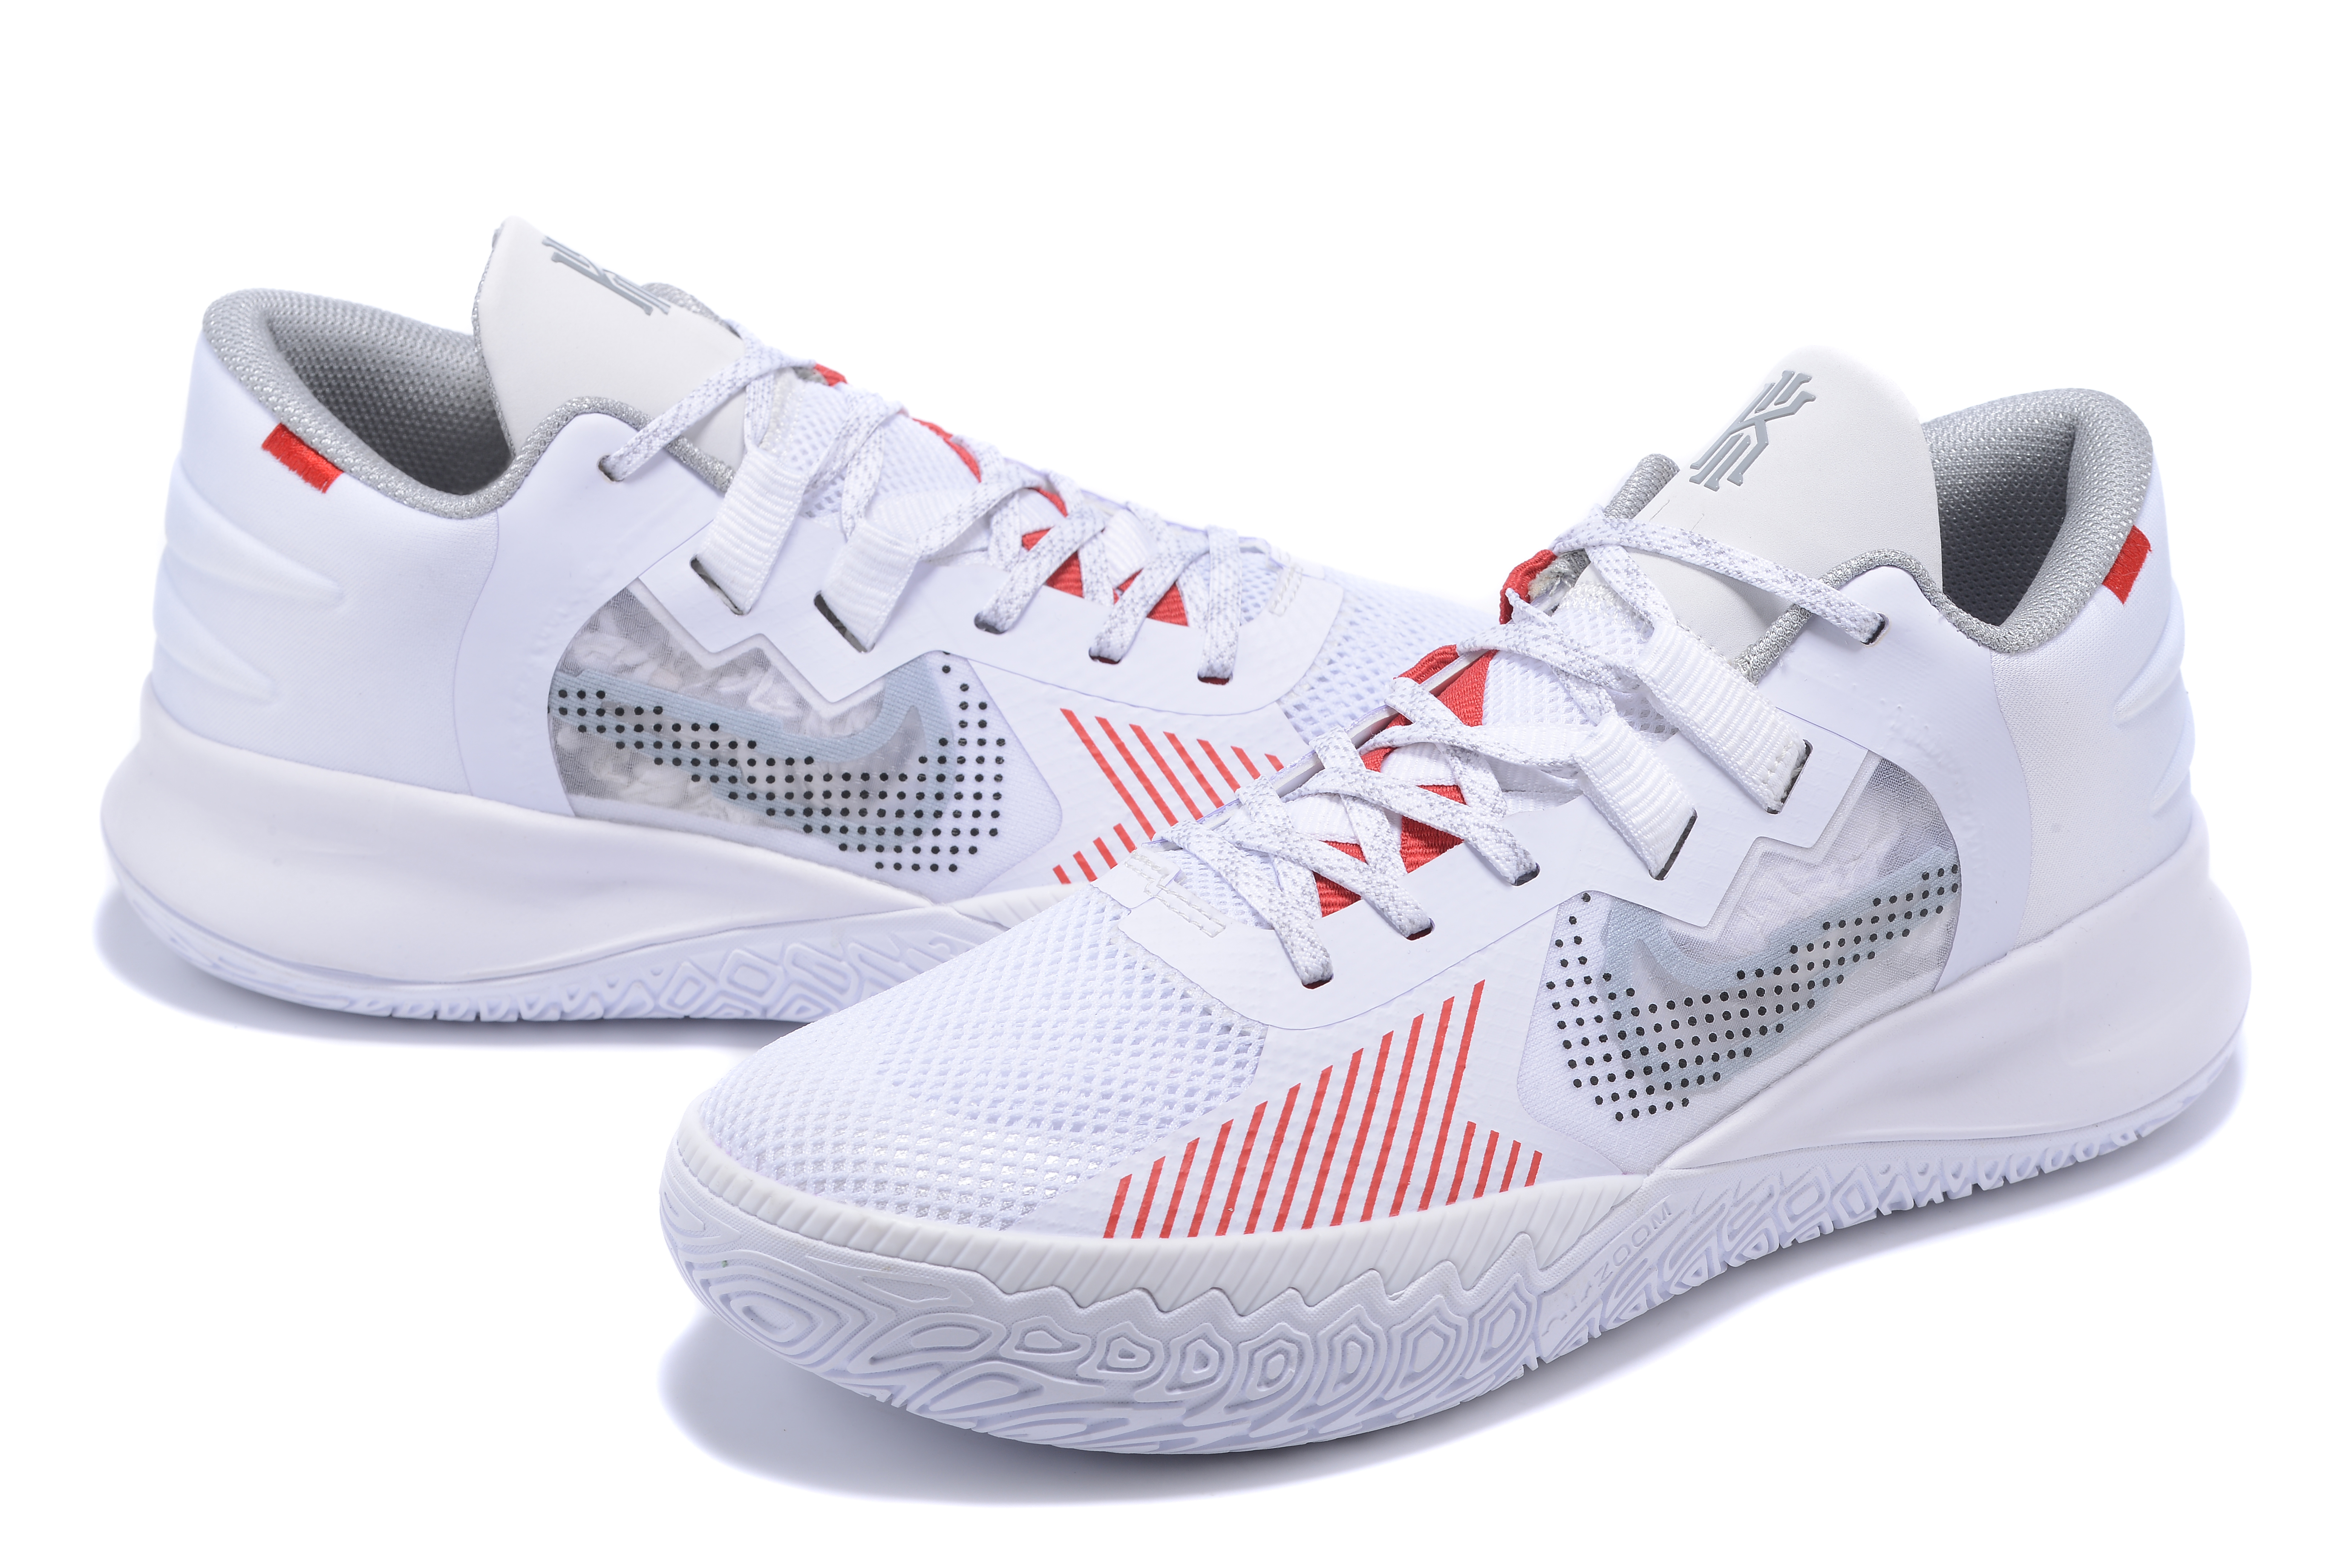 2022 Nike Kyrie Flytrap 5 EP White Grey Red Shoes